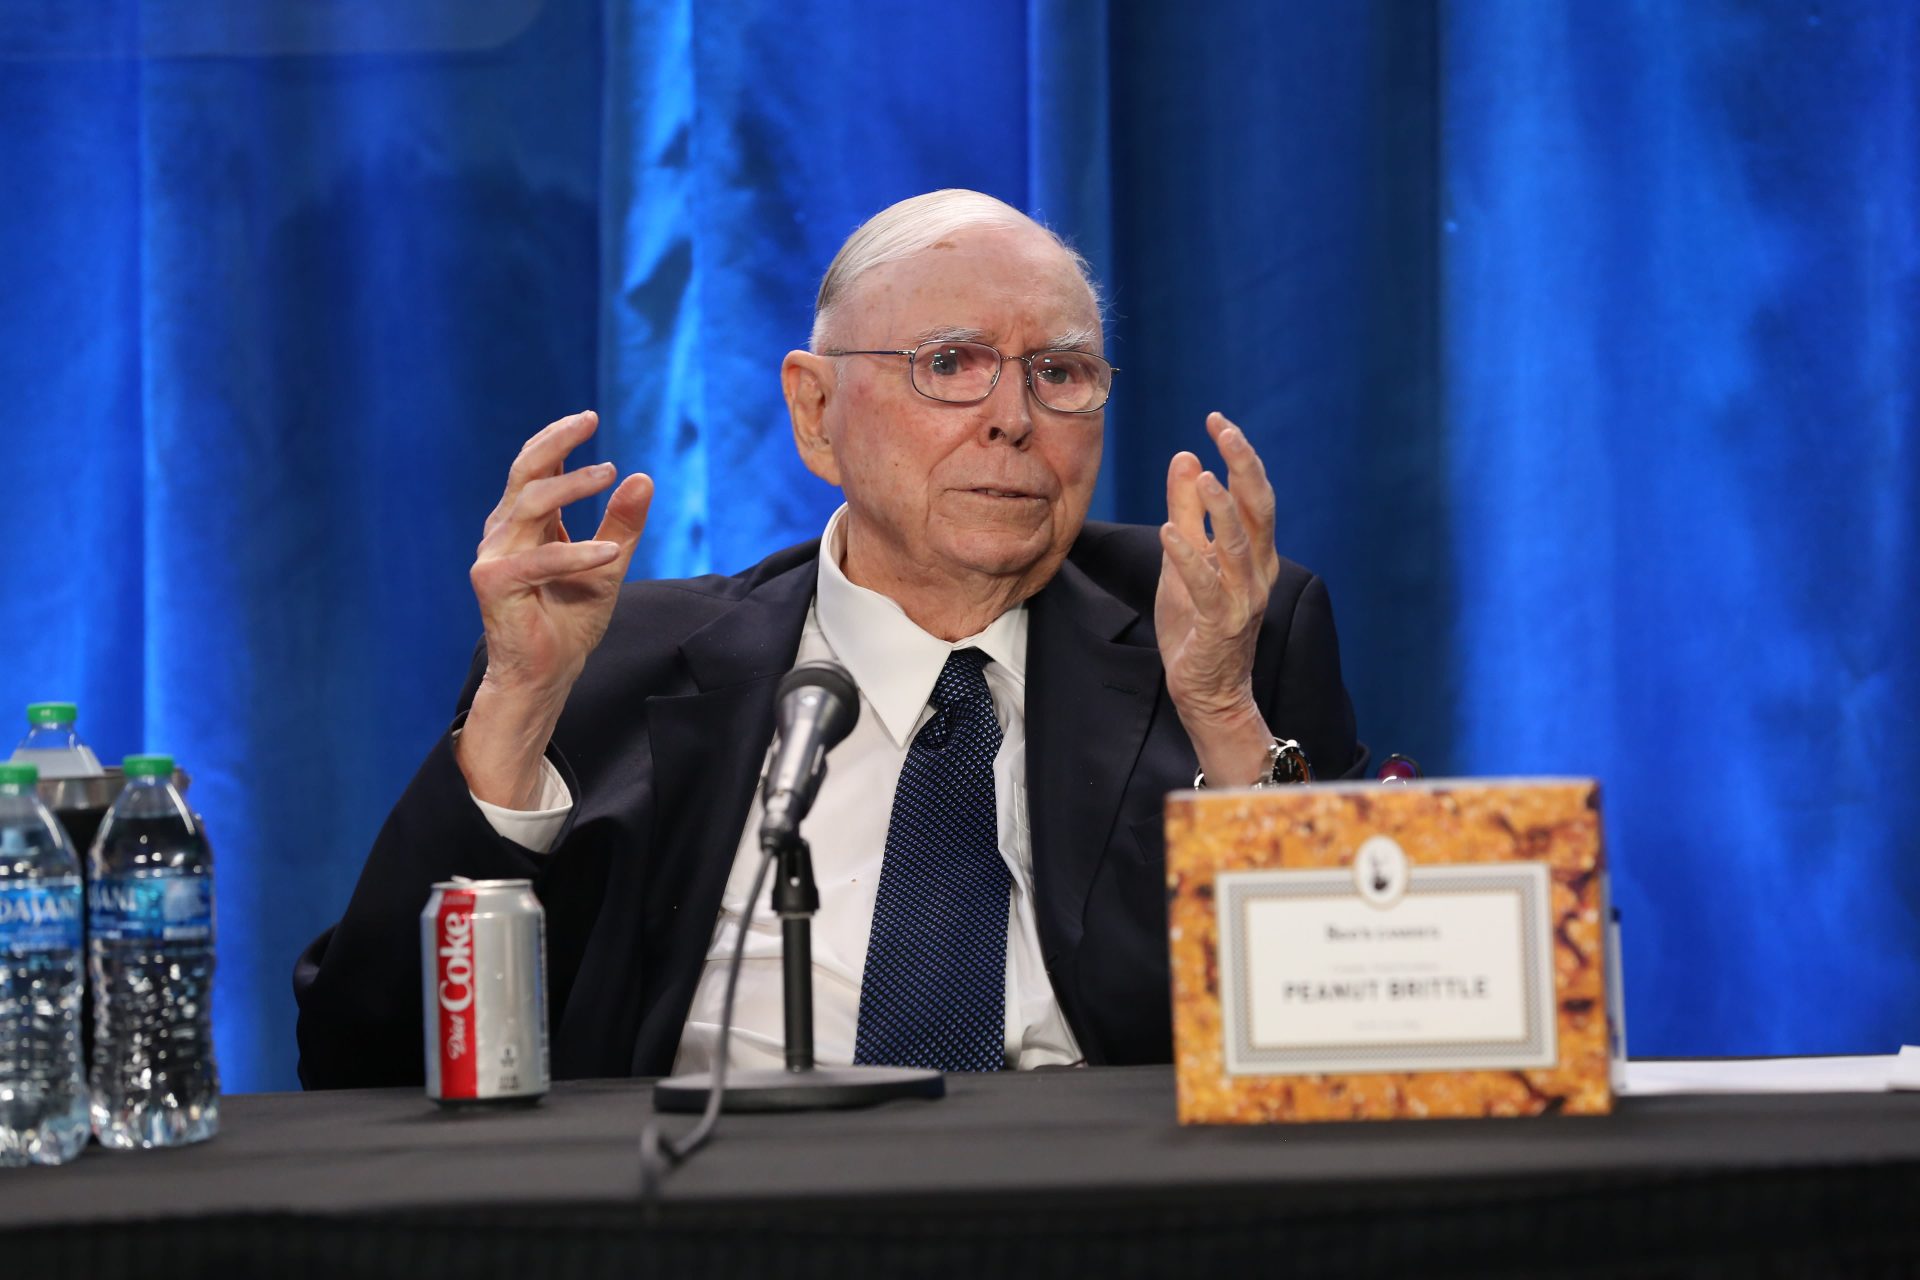 Charlie Munger calls bitcoin ‘disgusting and opposite to the interests of civilization’